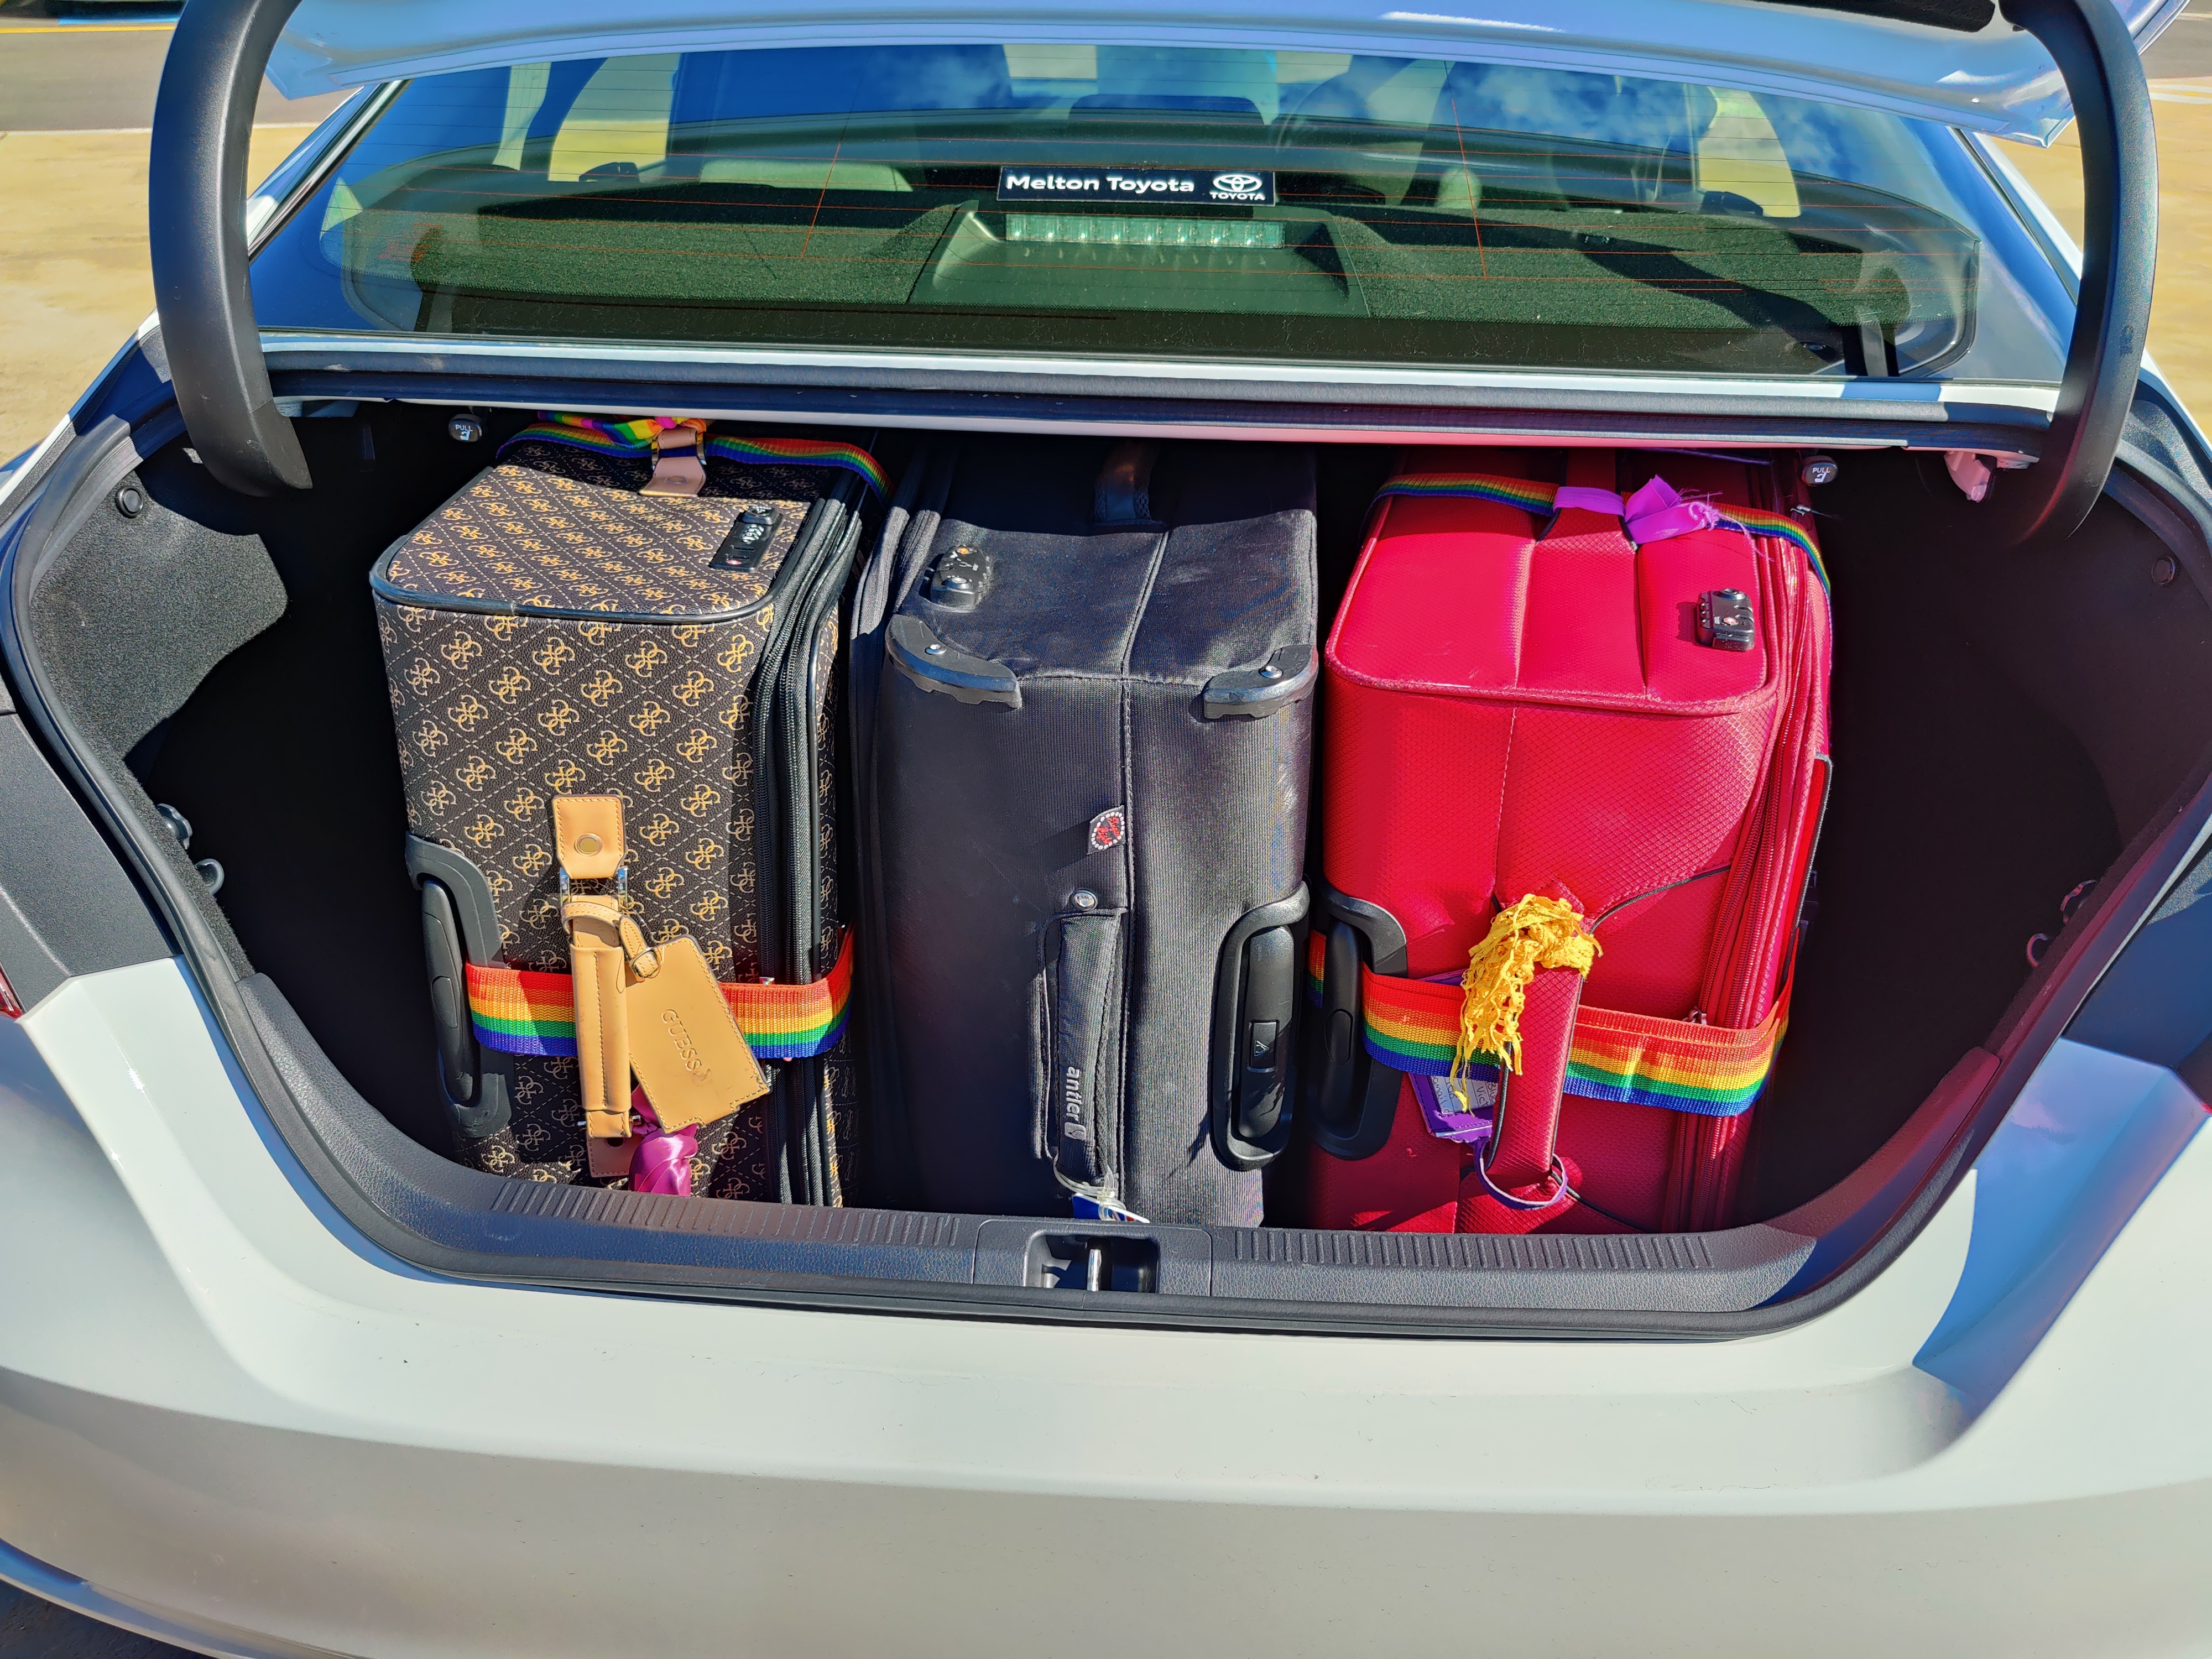 image of 3 suitcases in the boot of a Camry